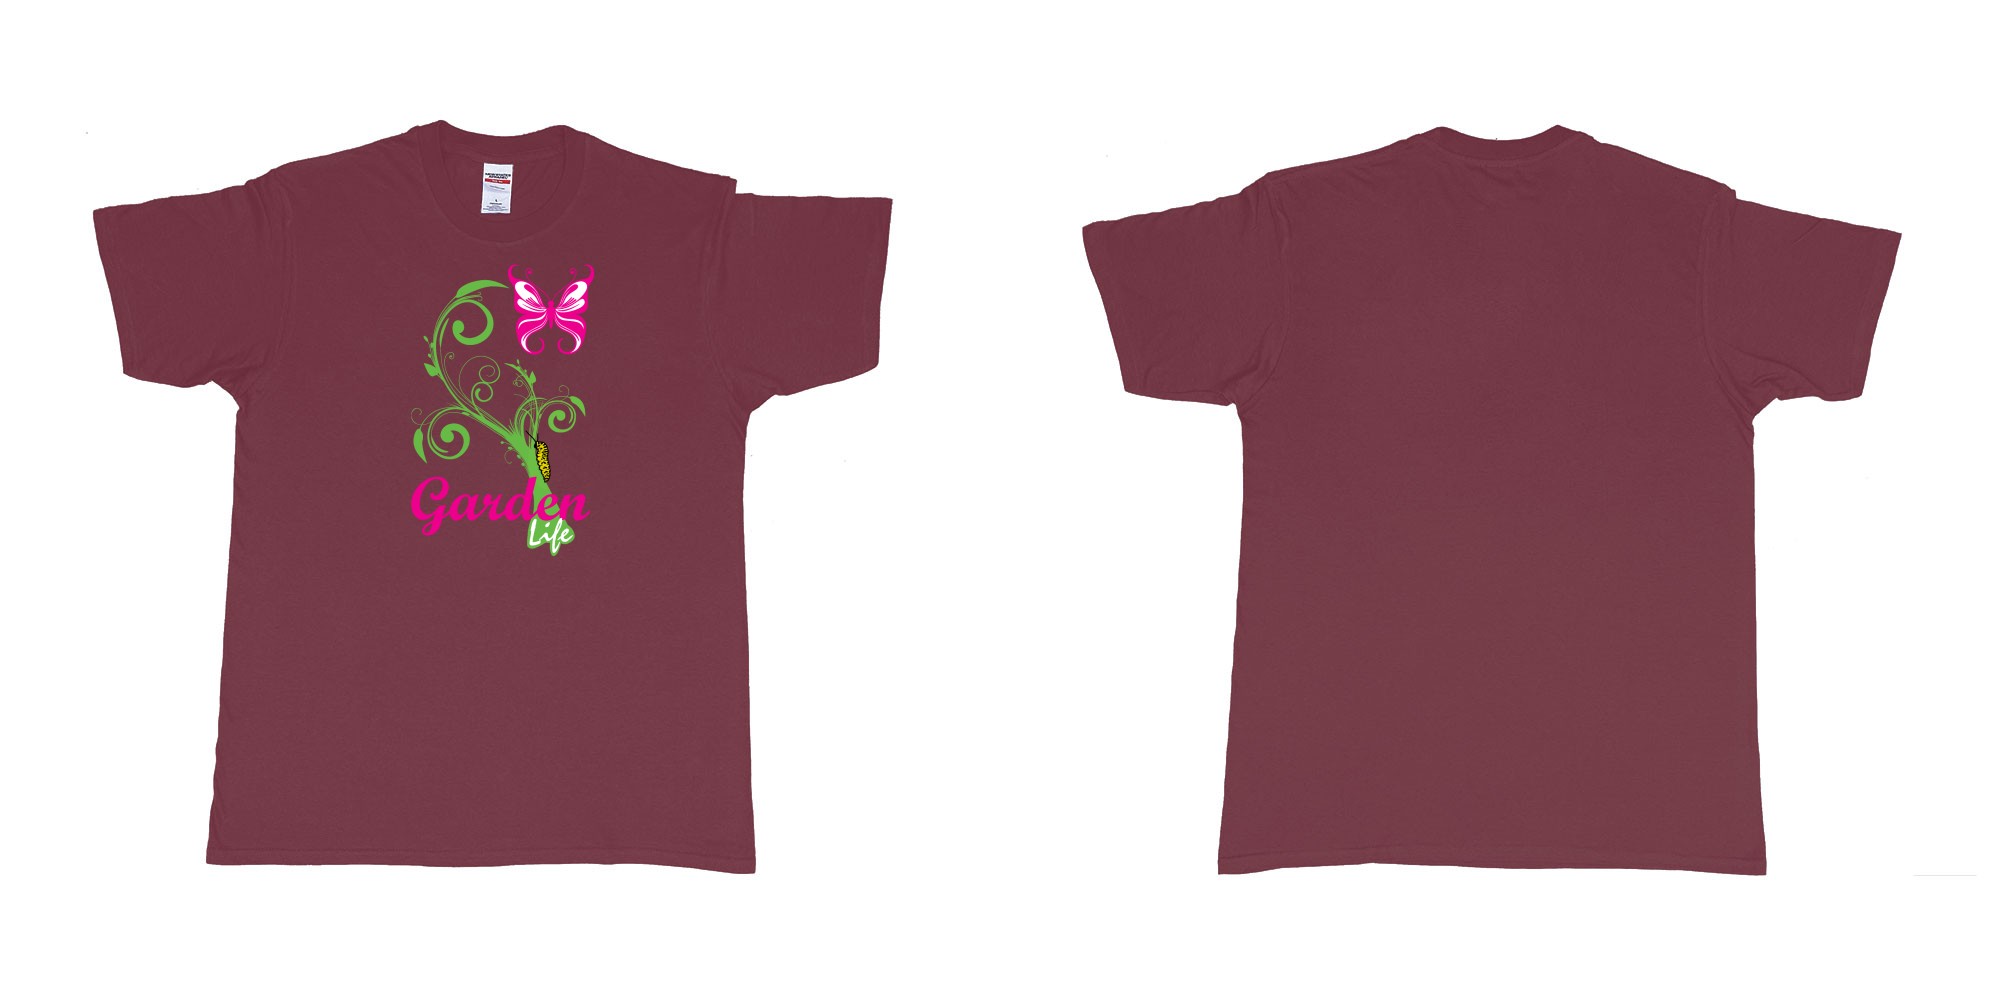 Custom tshirt design garden life transformation from a caterpillar and a butterfly in fabric color marron choice your own text made in Bali by The Pirate Way